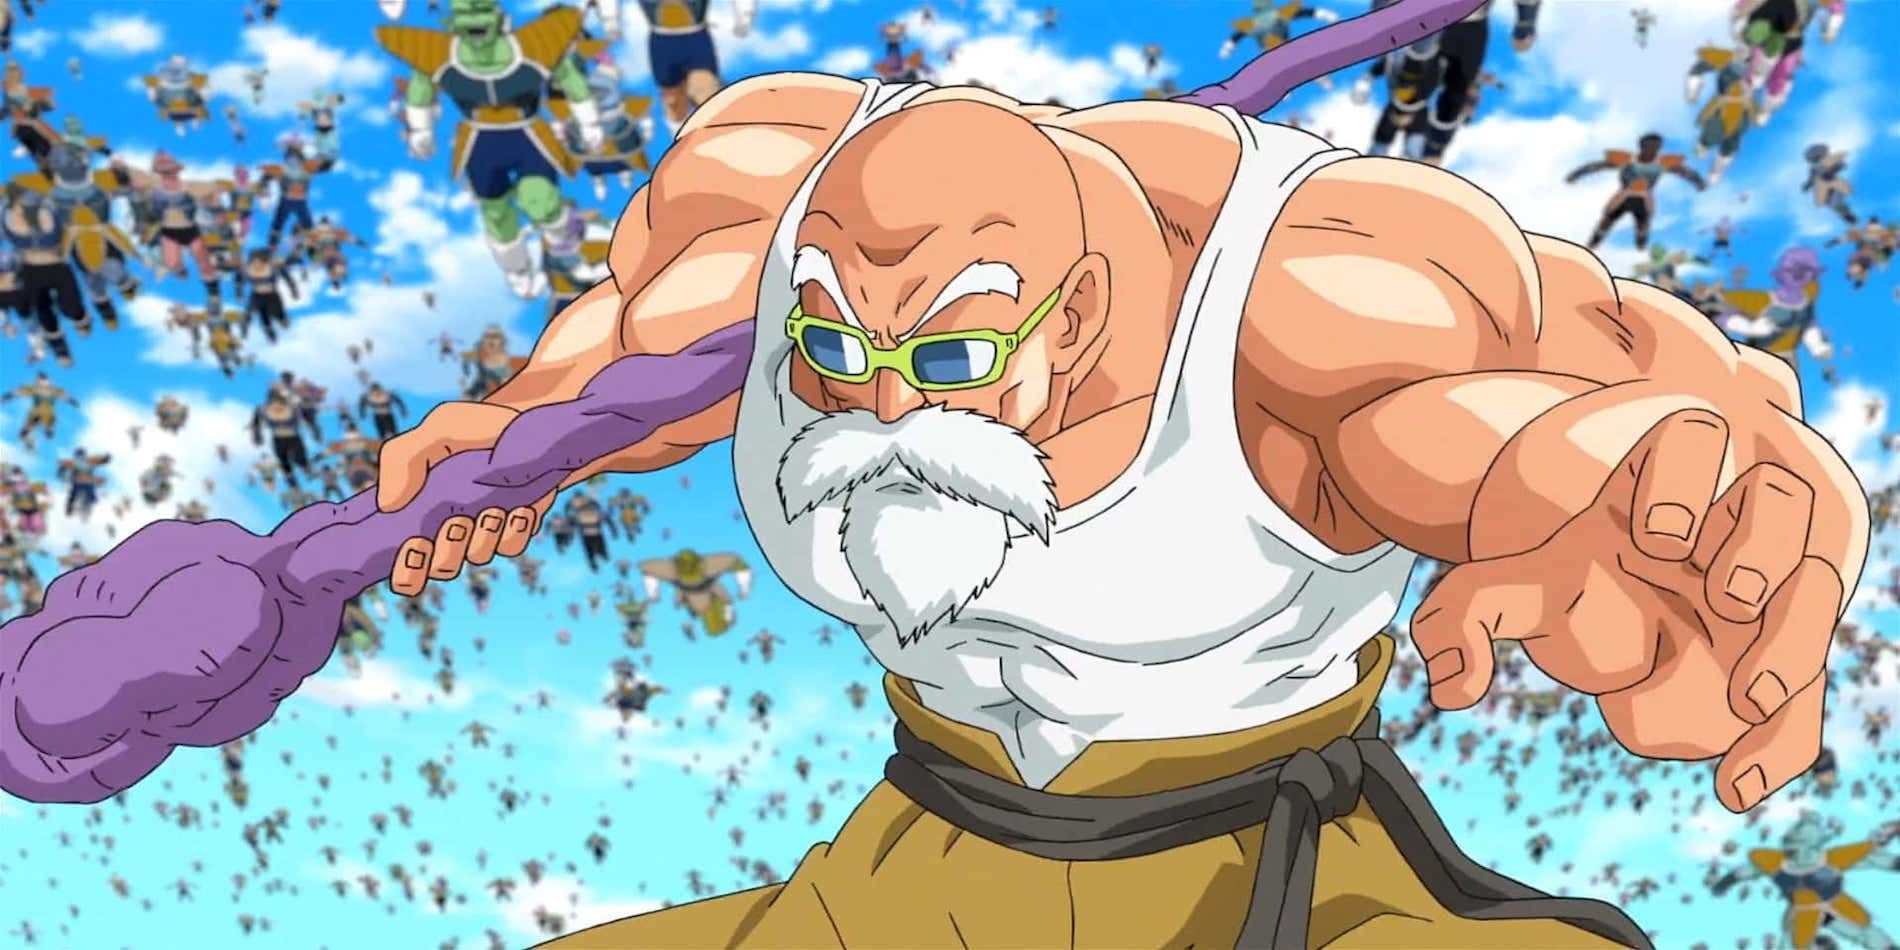 Master Roshi fights Frieza's Army in Dragon Ball Z Resurrection F